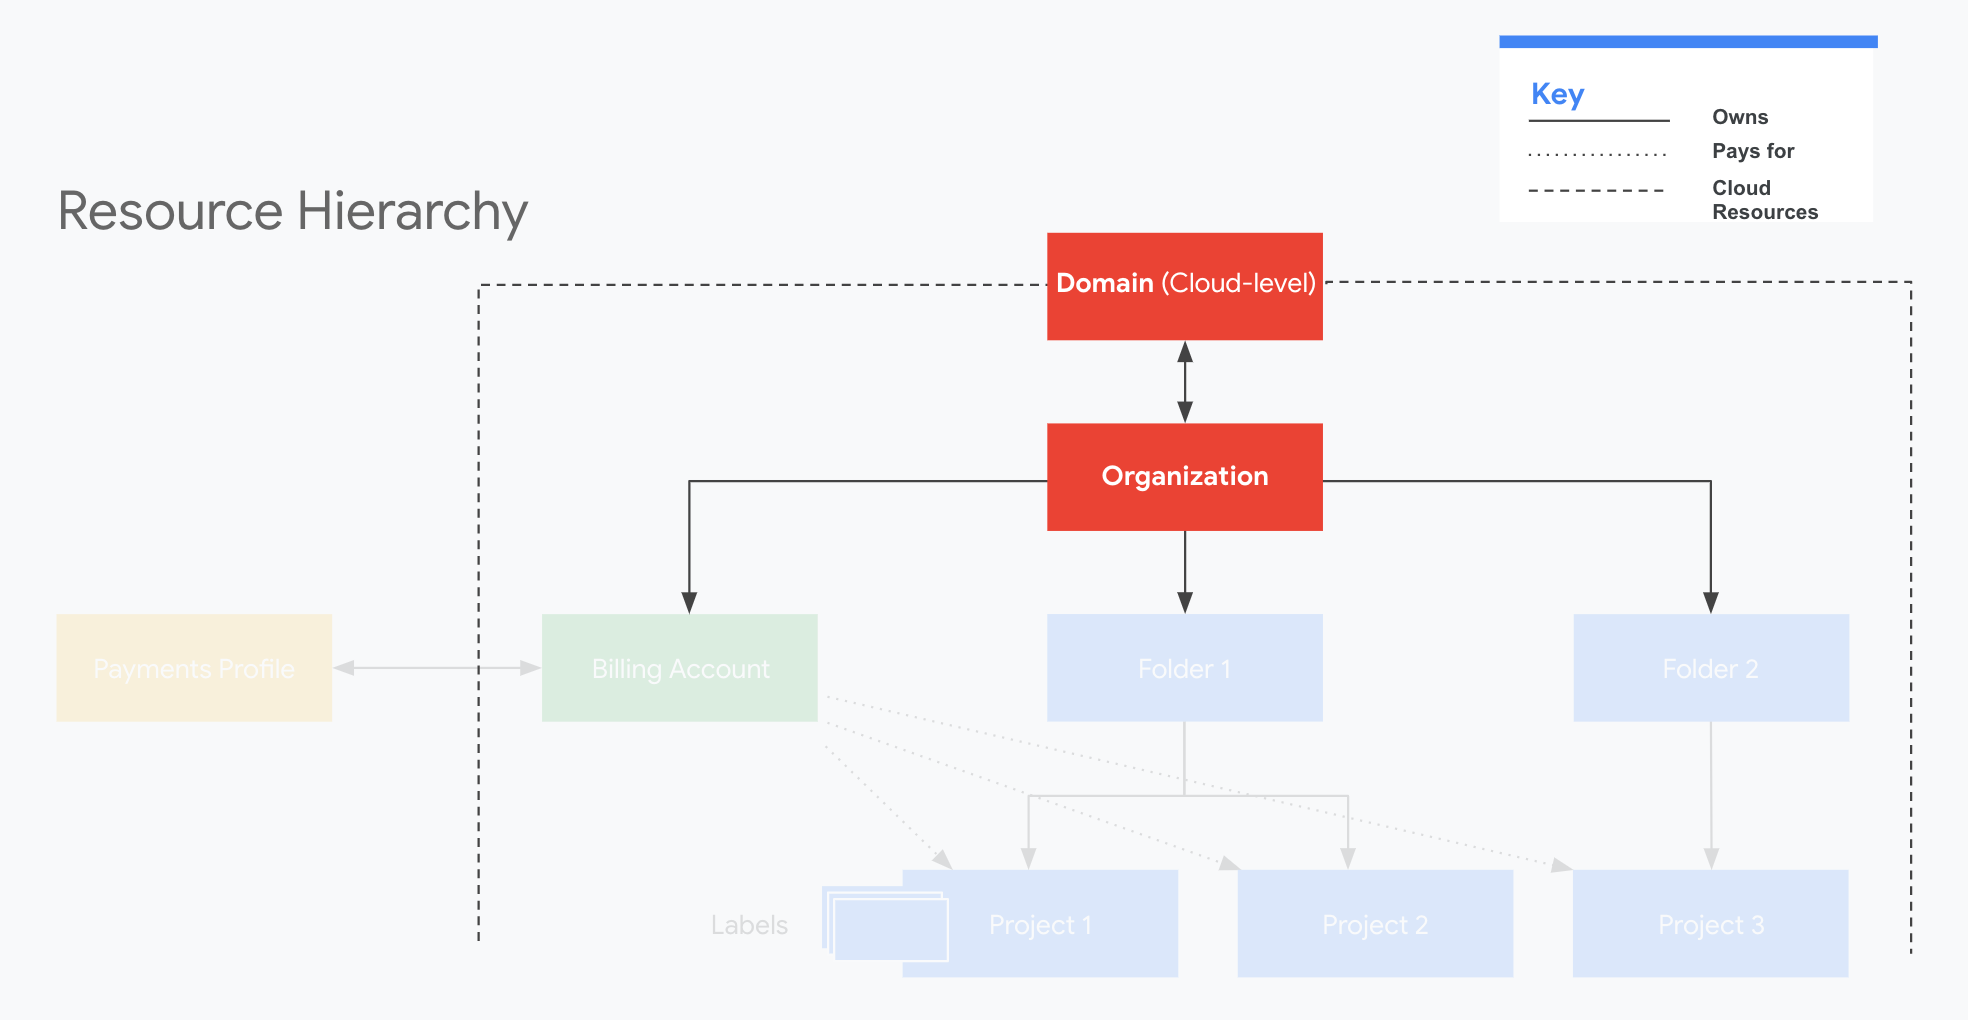 Domain and Organization in the Resource Hierarchy